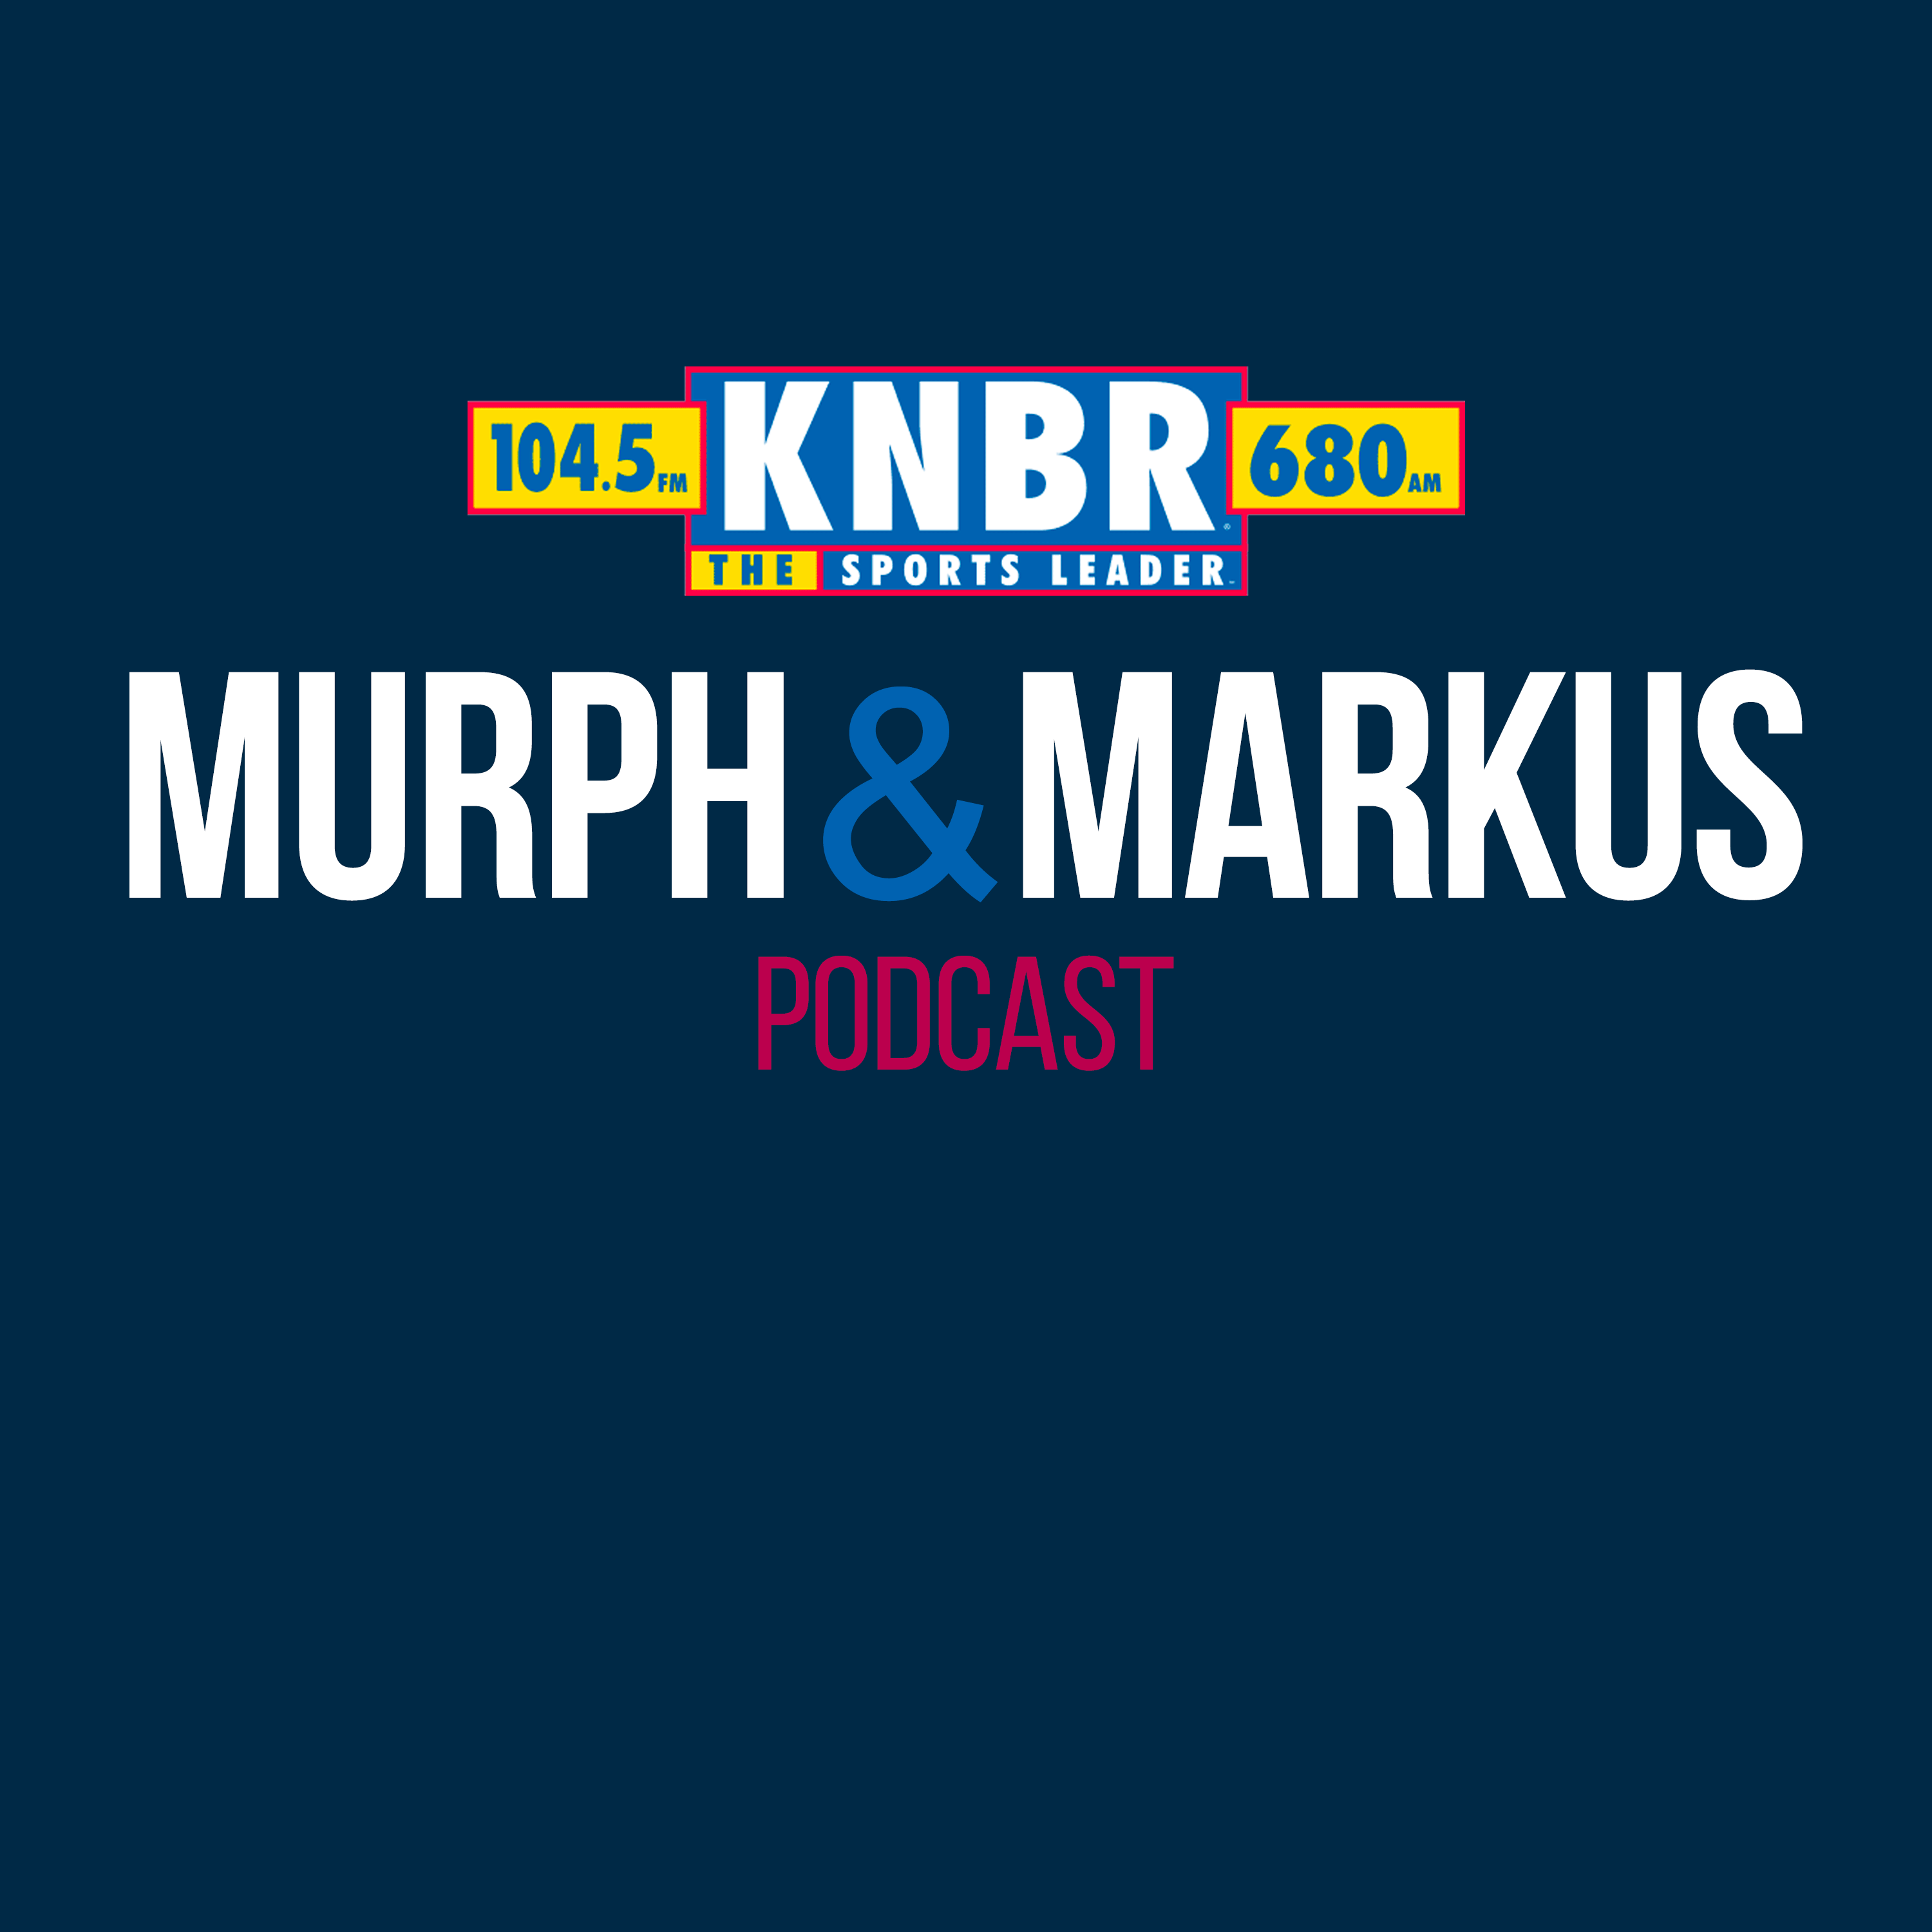 4-16 Stan Van Gundy joins Murph & Markus to give his perspective on the biggest key factors in the Warriors vs Kings play-in game tonight in Sacramento